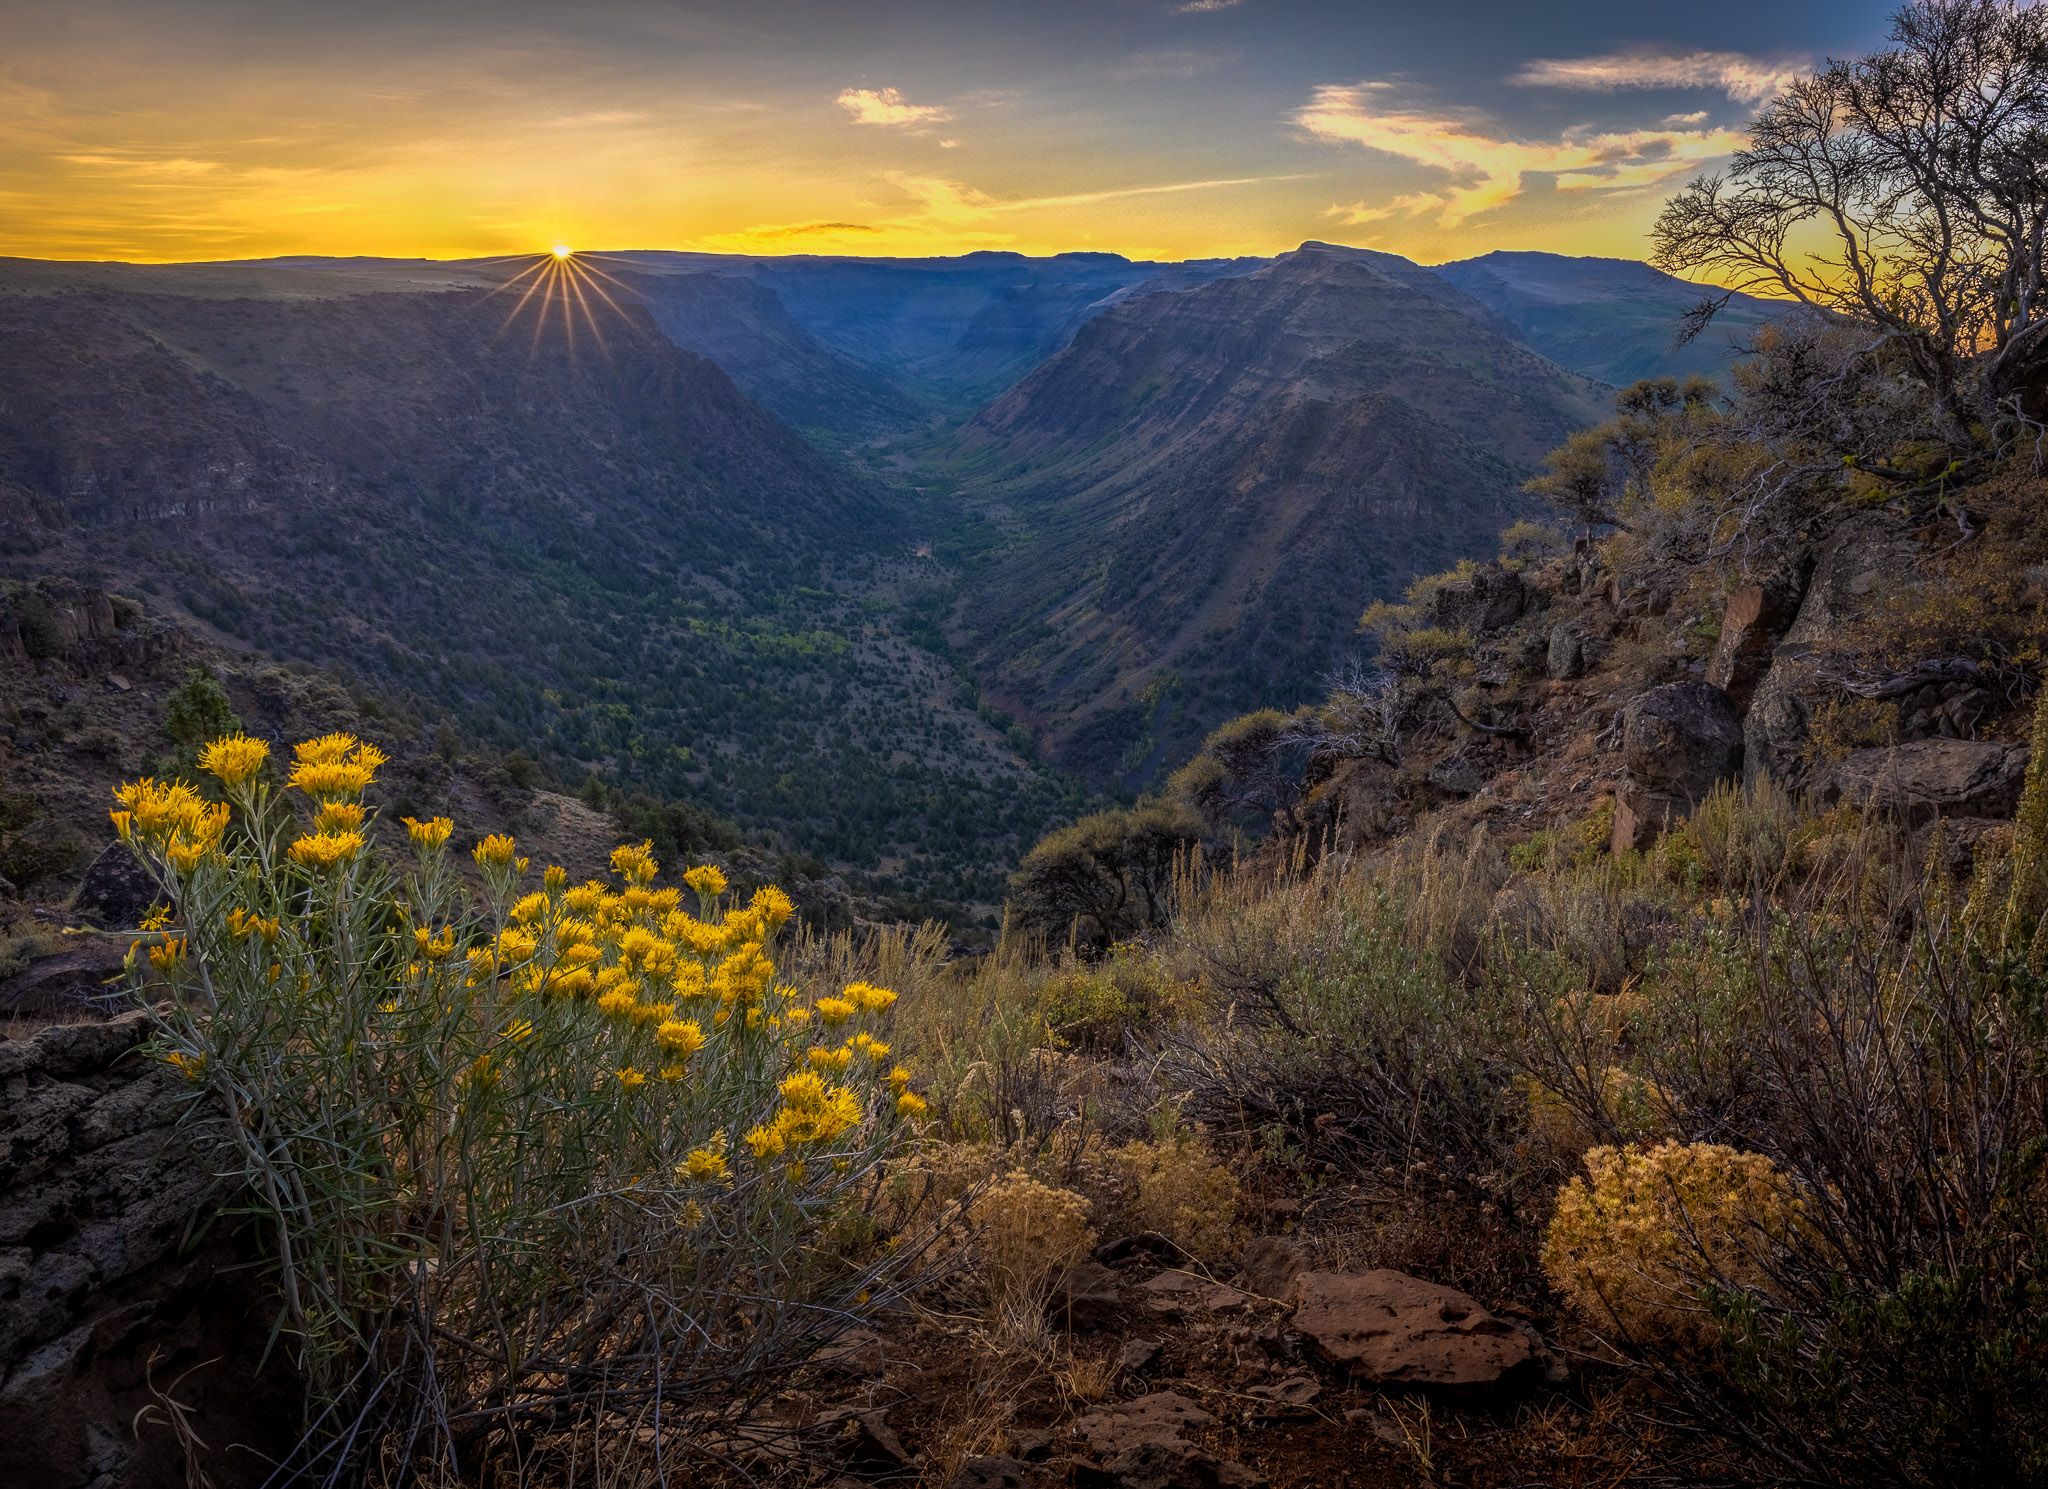 Sunrise over Big Indian Gorge, Steens Mountain